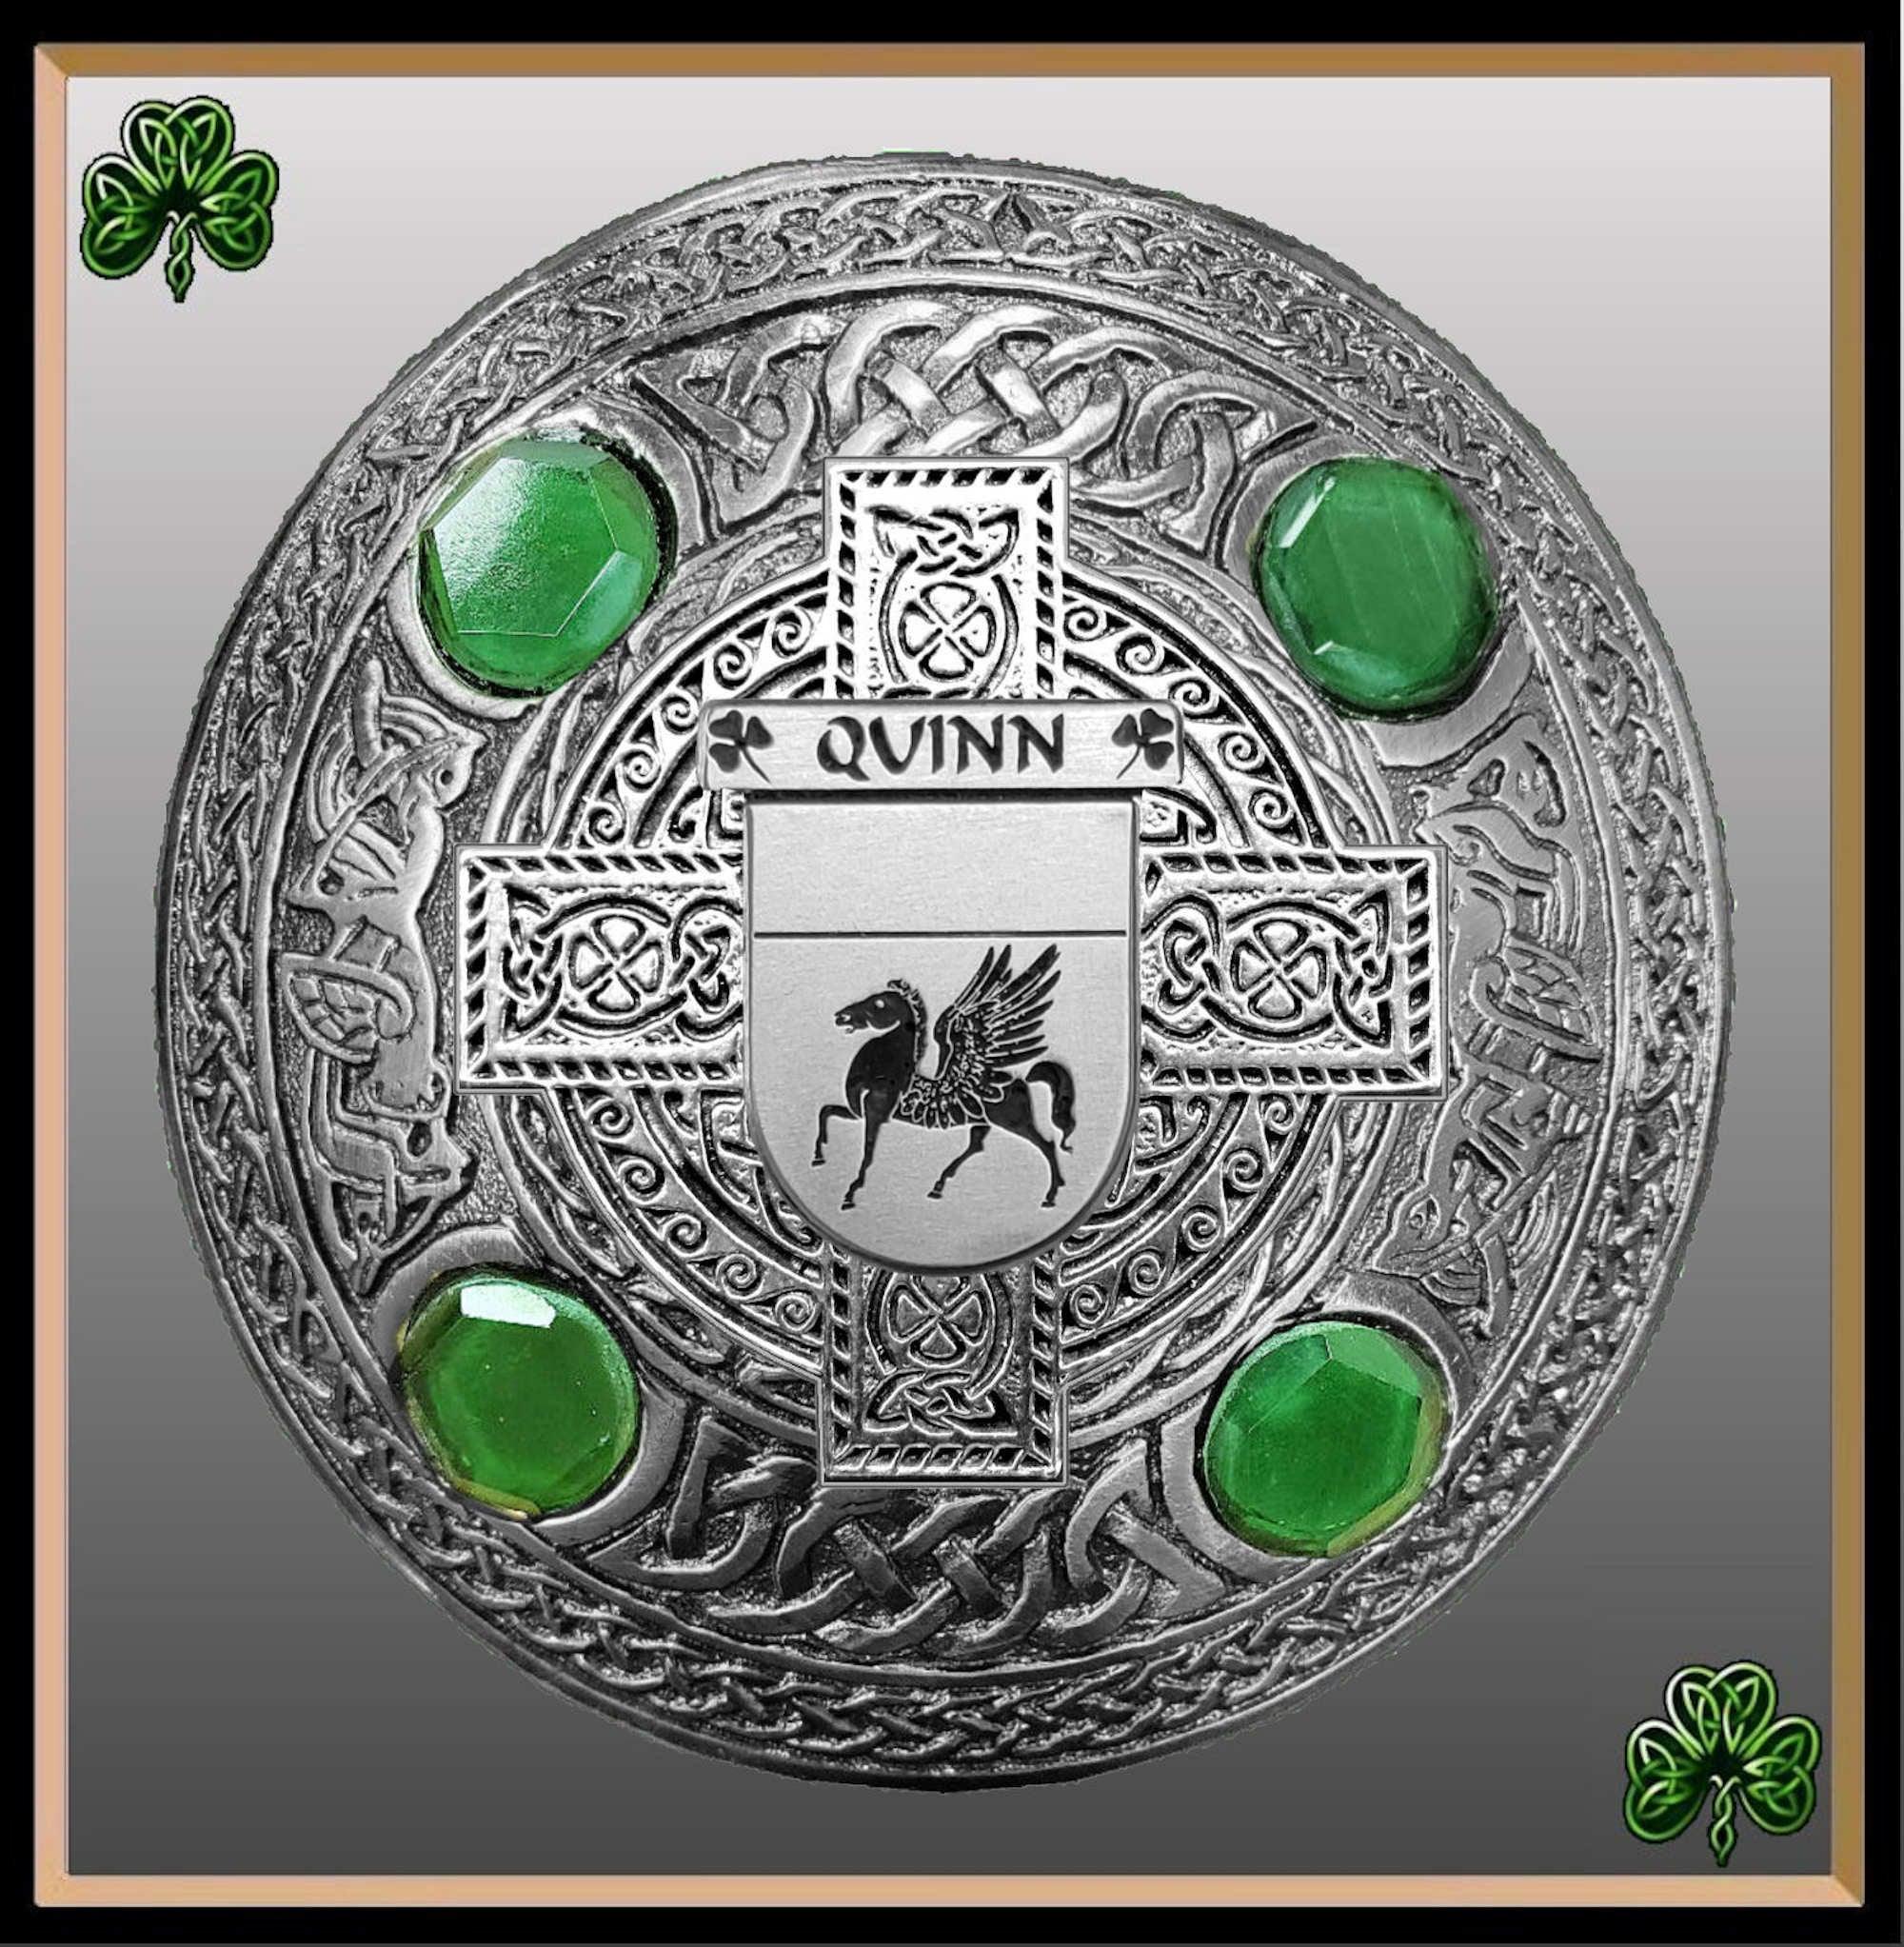 Quinn Irish Coat of Arms Celtic Cross Plaid Brooch with Green Stones